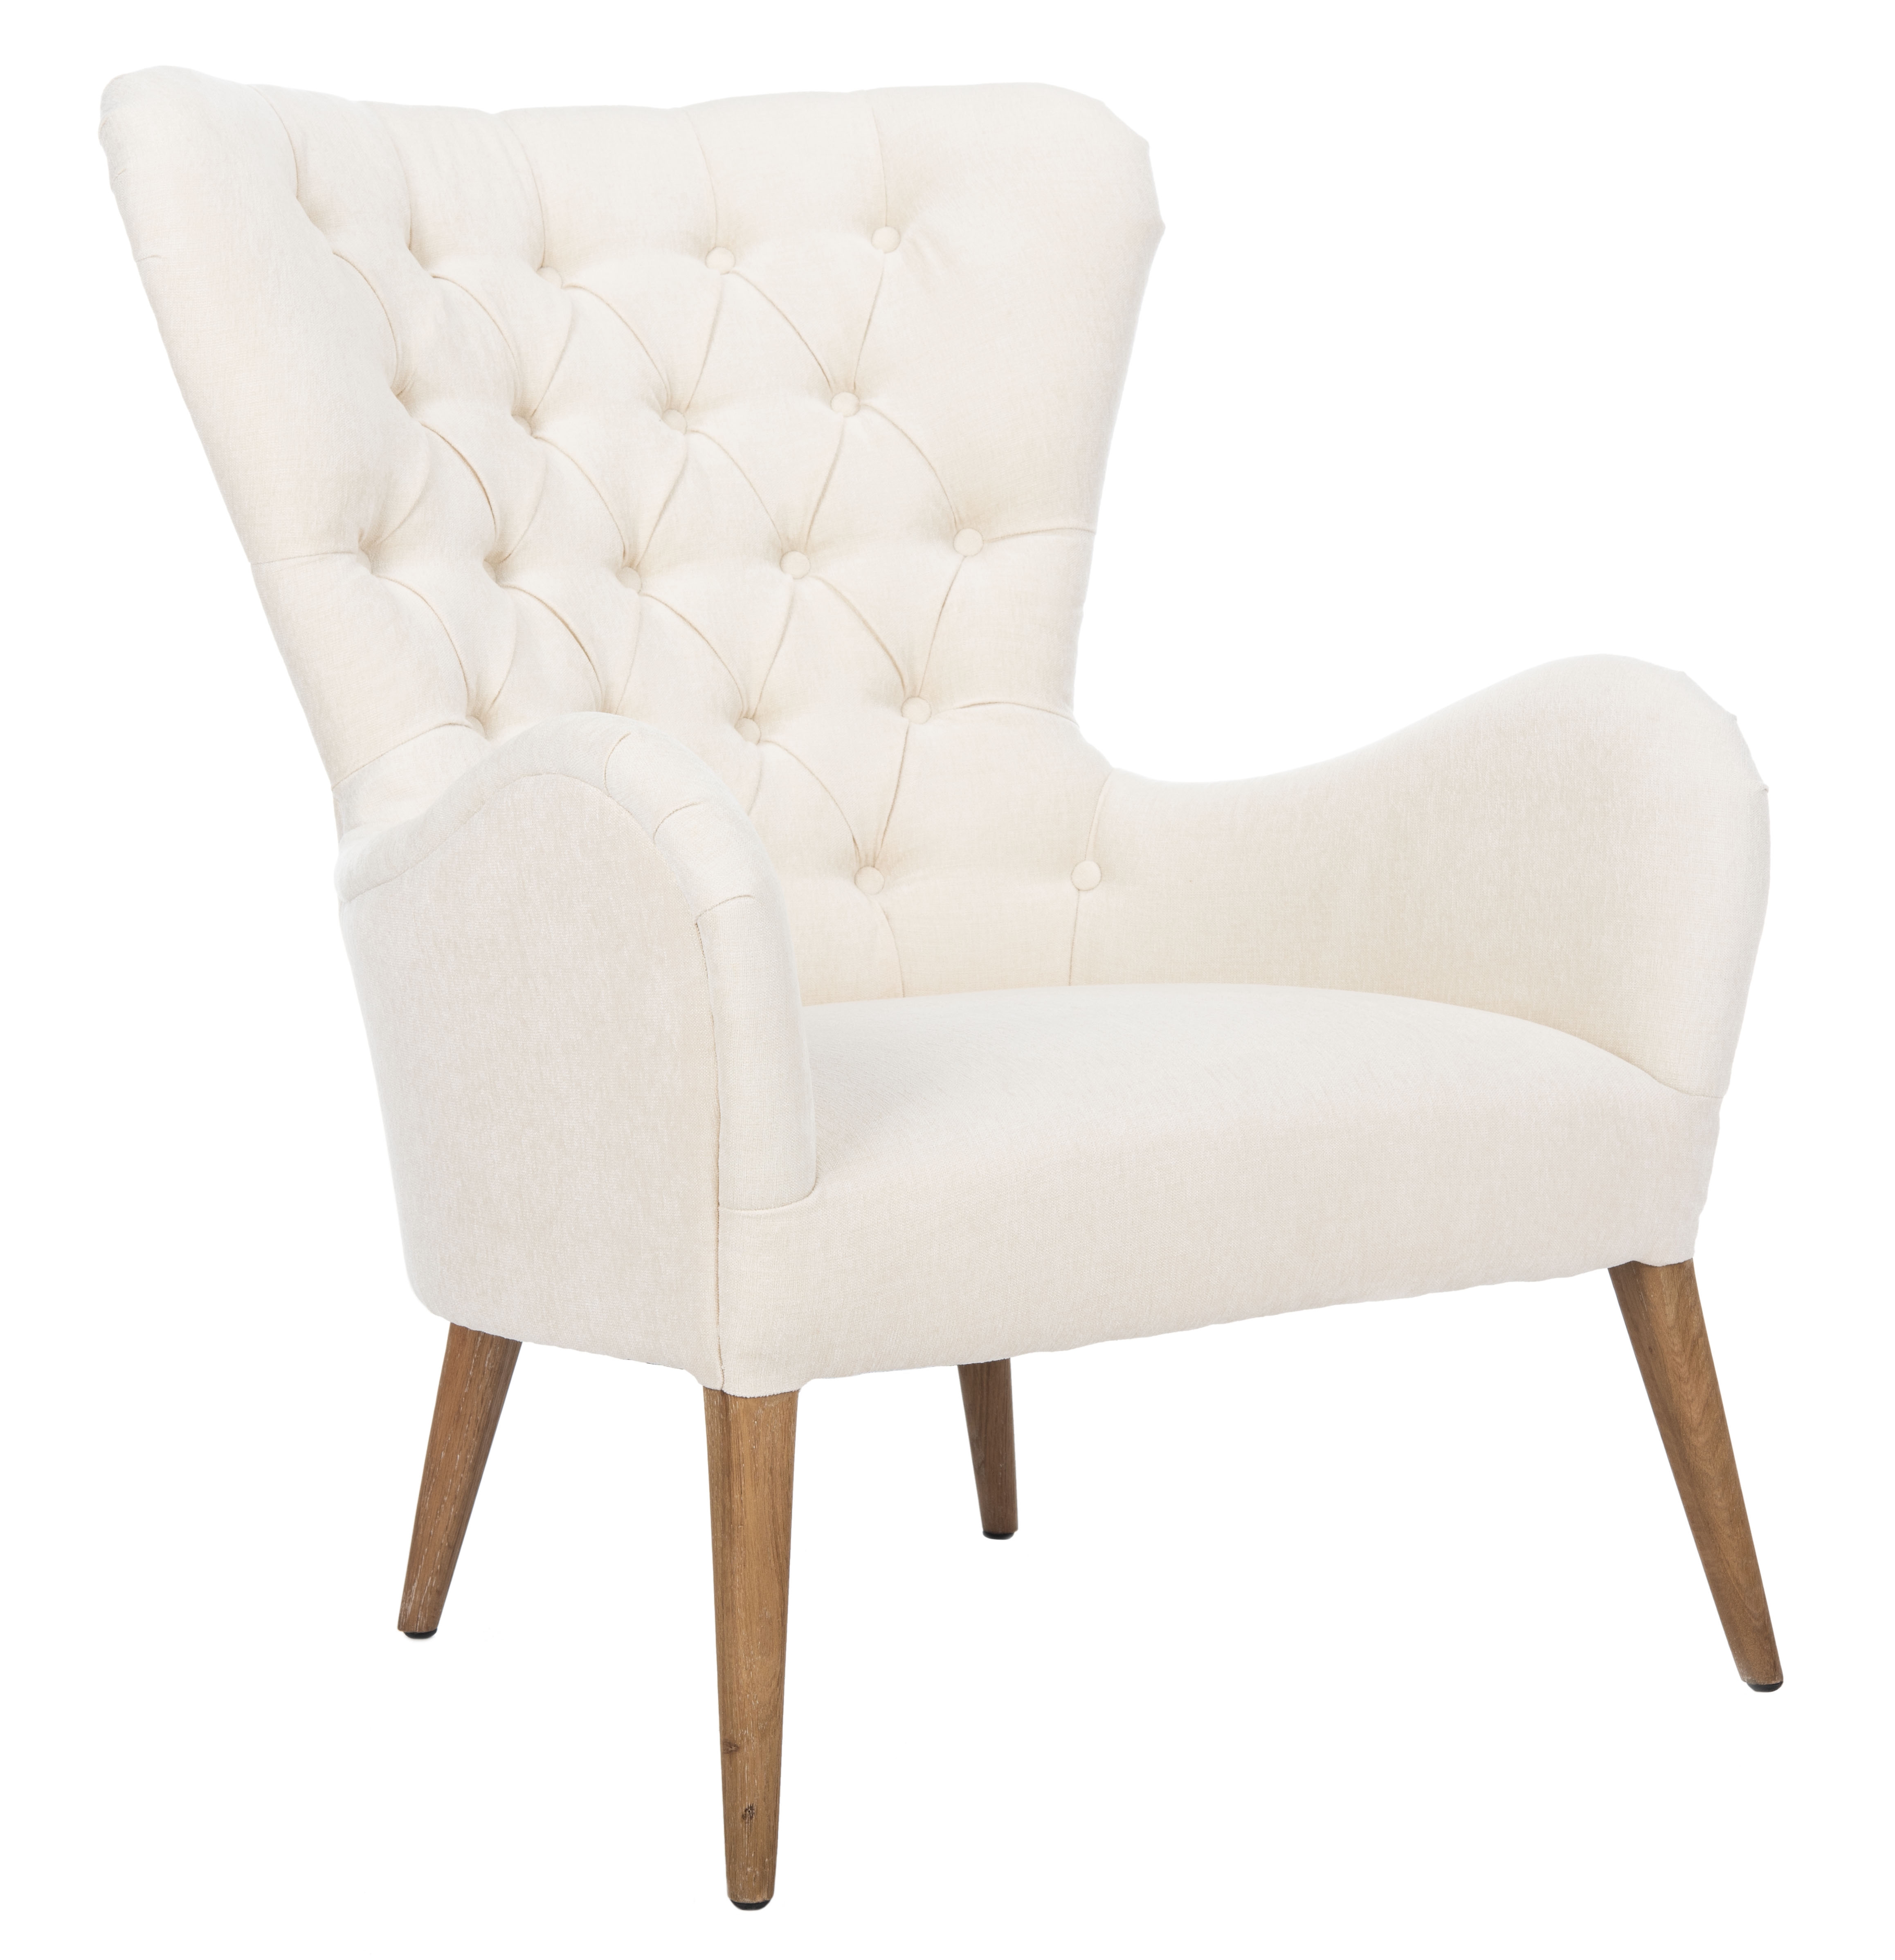 Brayden Contemporary Wingback Chair - Off White - Arlo Home - Image 4